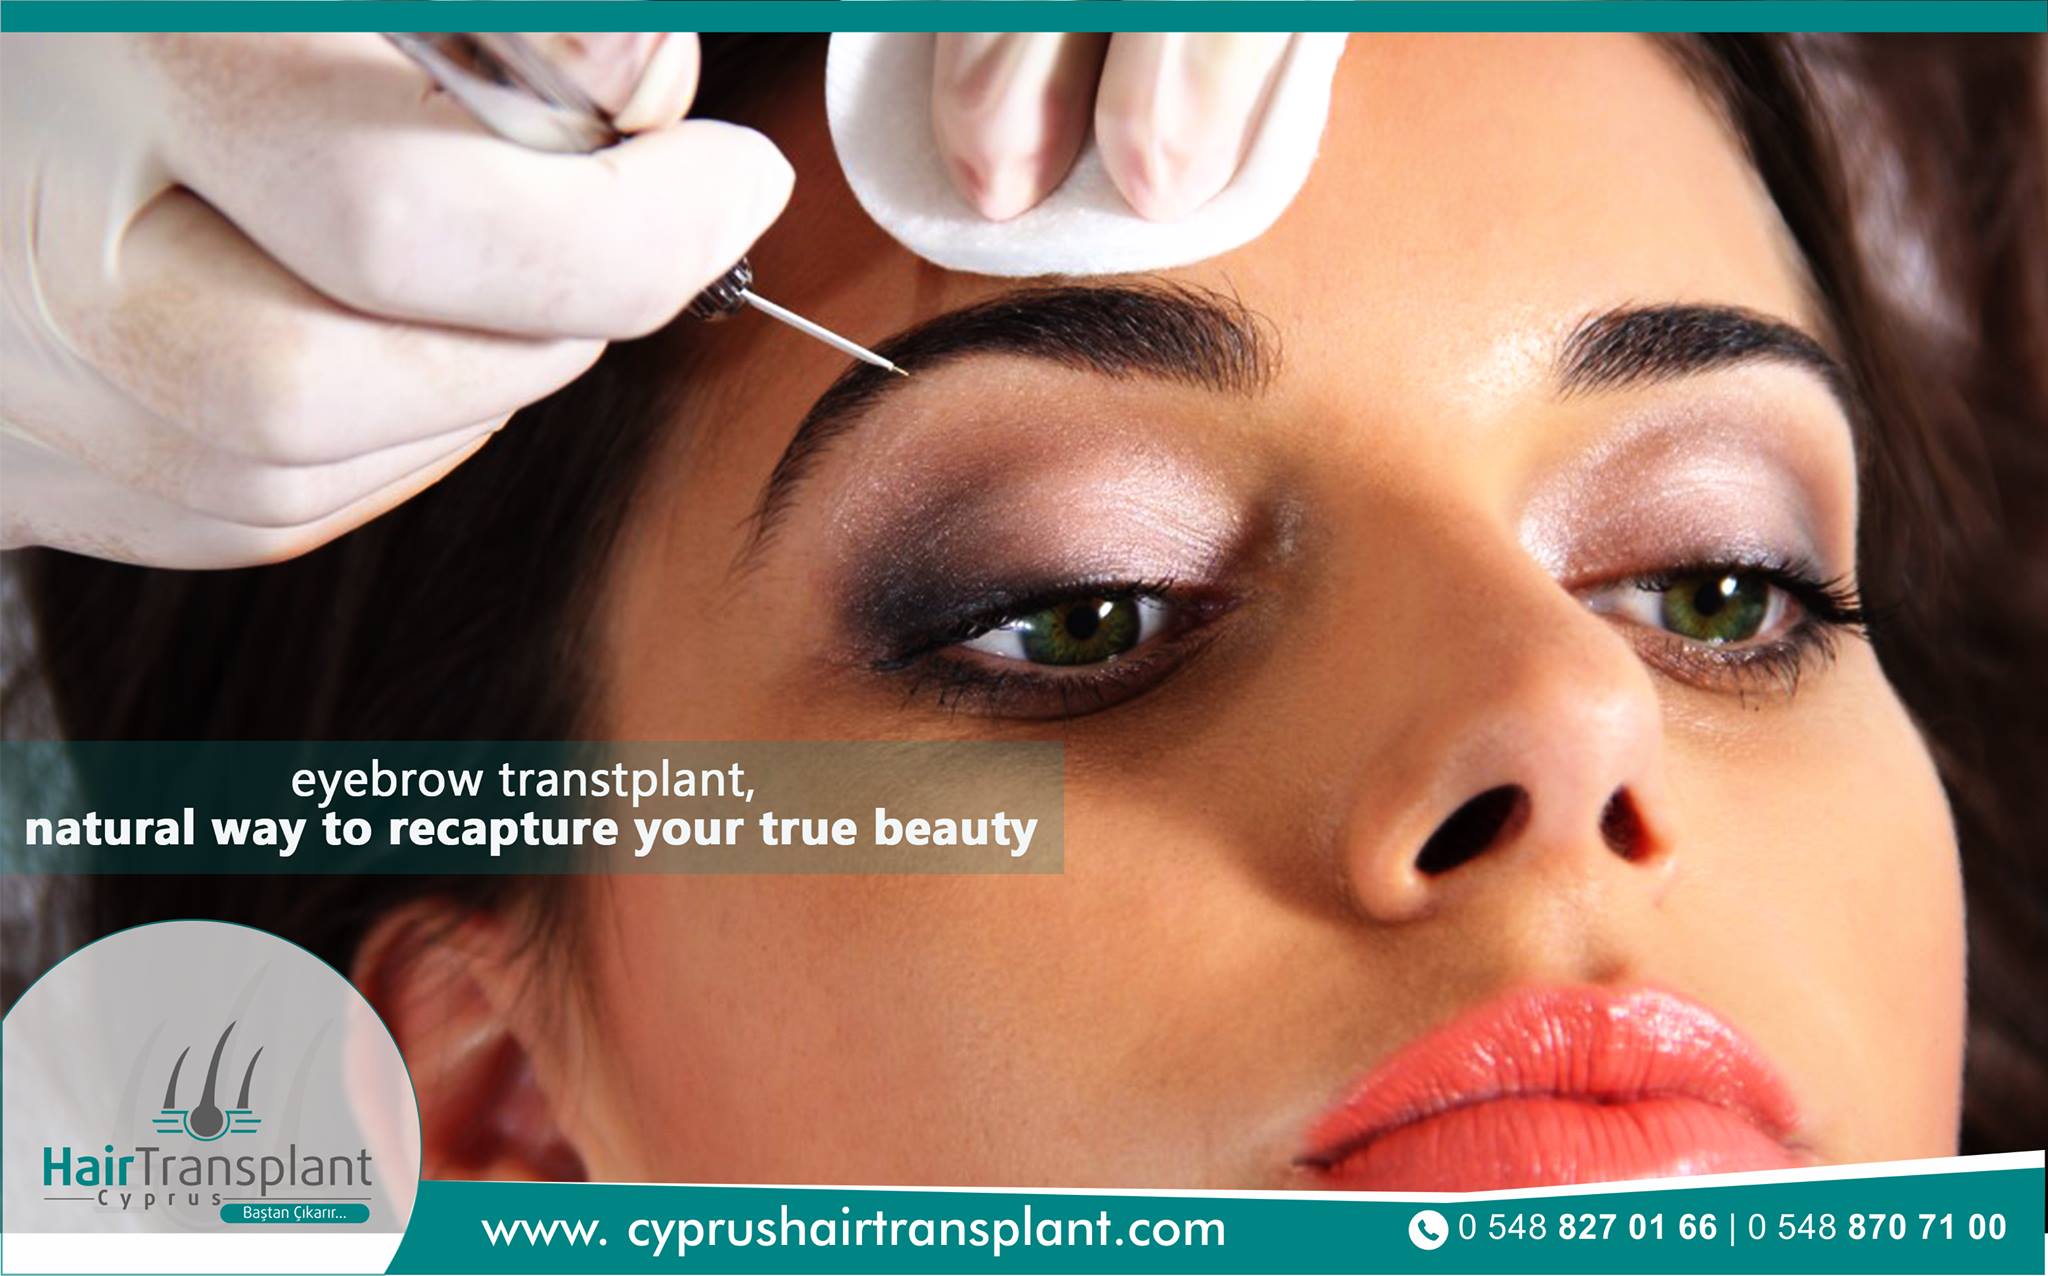 Cyprus Hair Transplant Clinic - Hair Transplant Clinics | Find Hair Loss  Surgeons in Our Exclusive Hair Restoration Network Worldwide